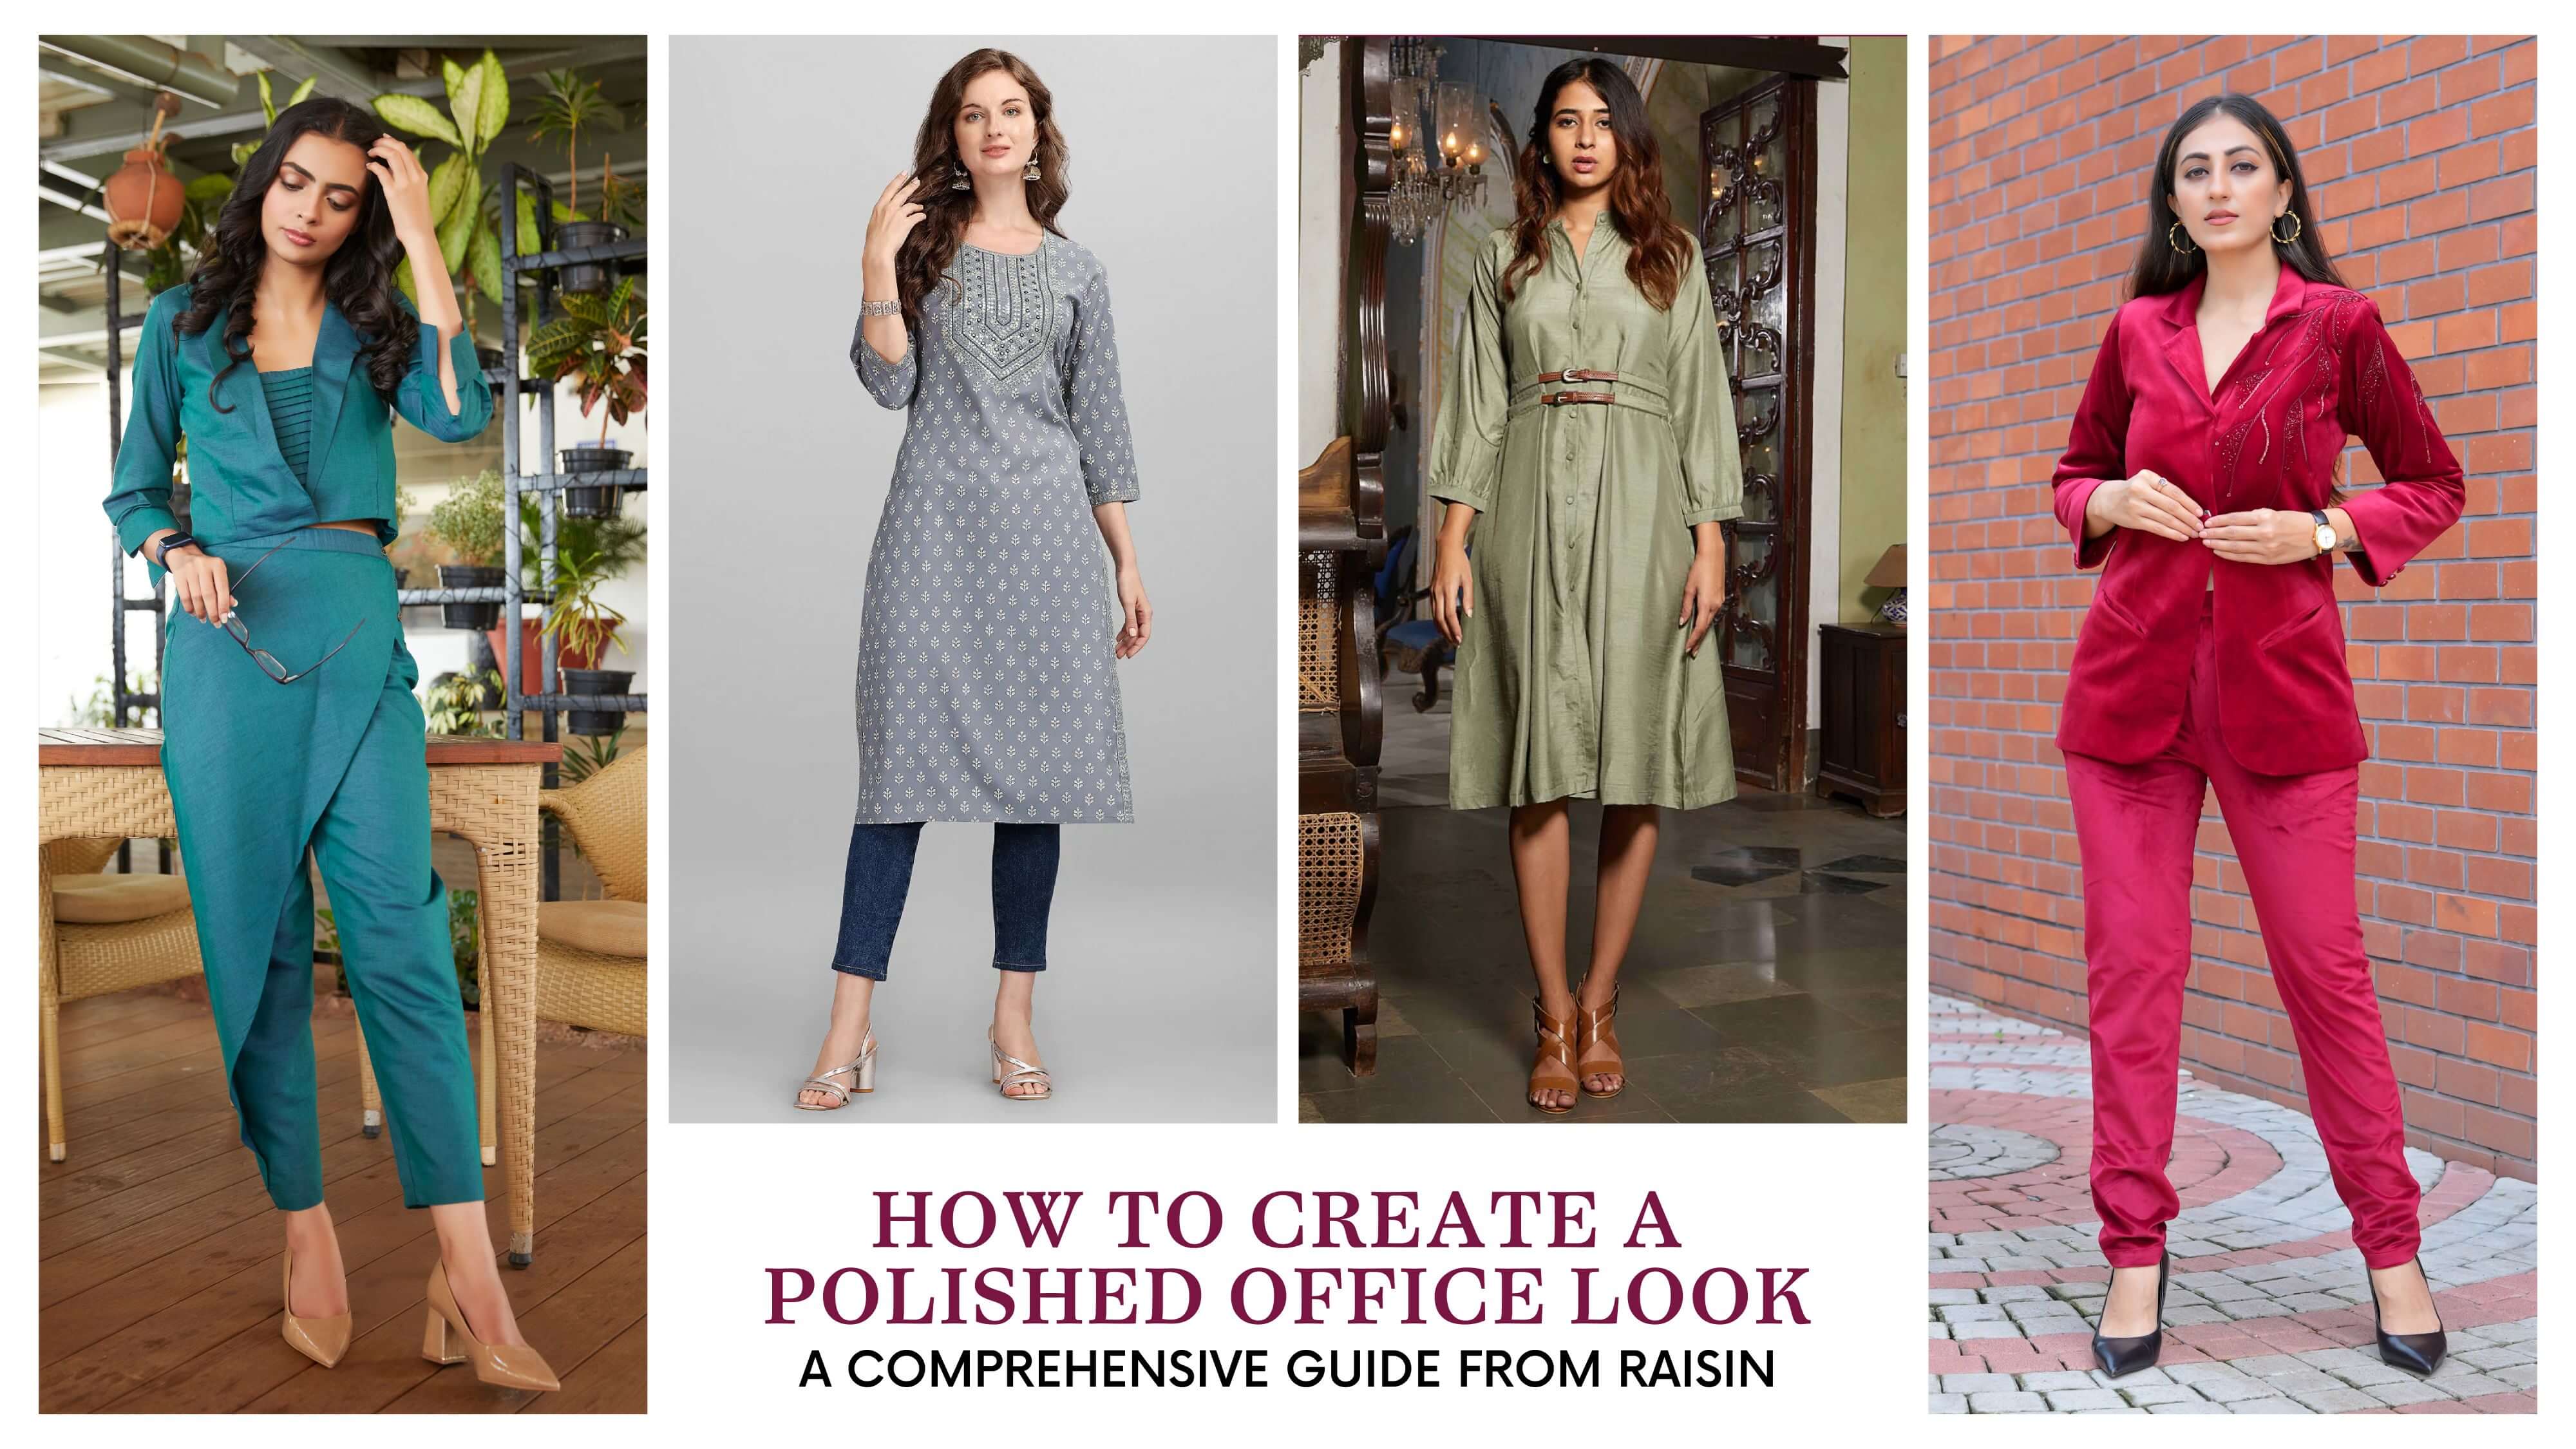 Styling Guide To Create A Polished Office Look For Ladies